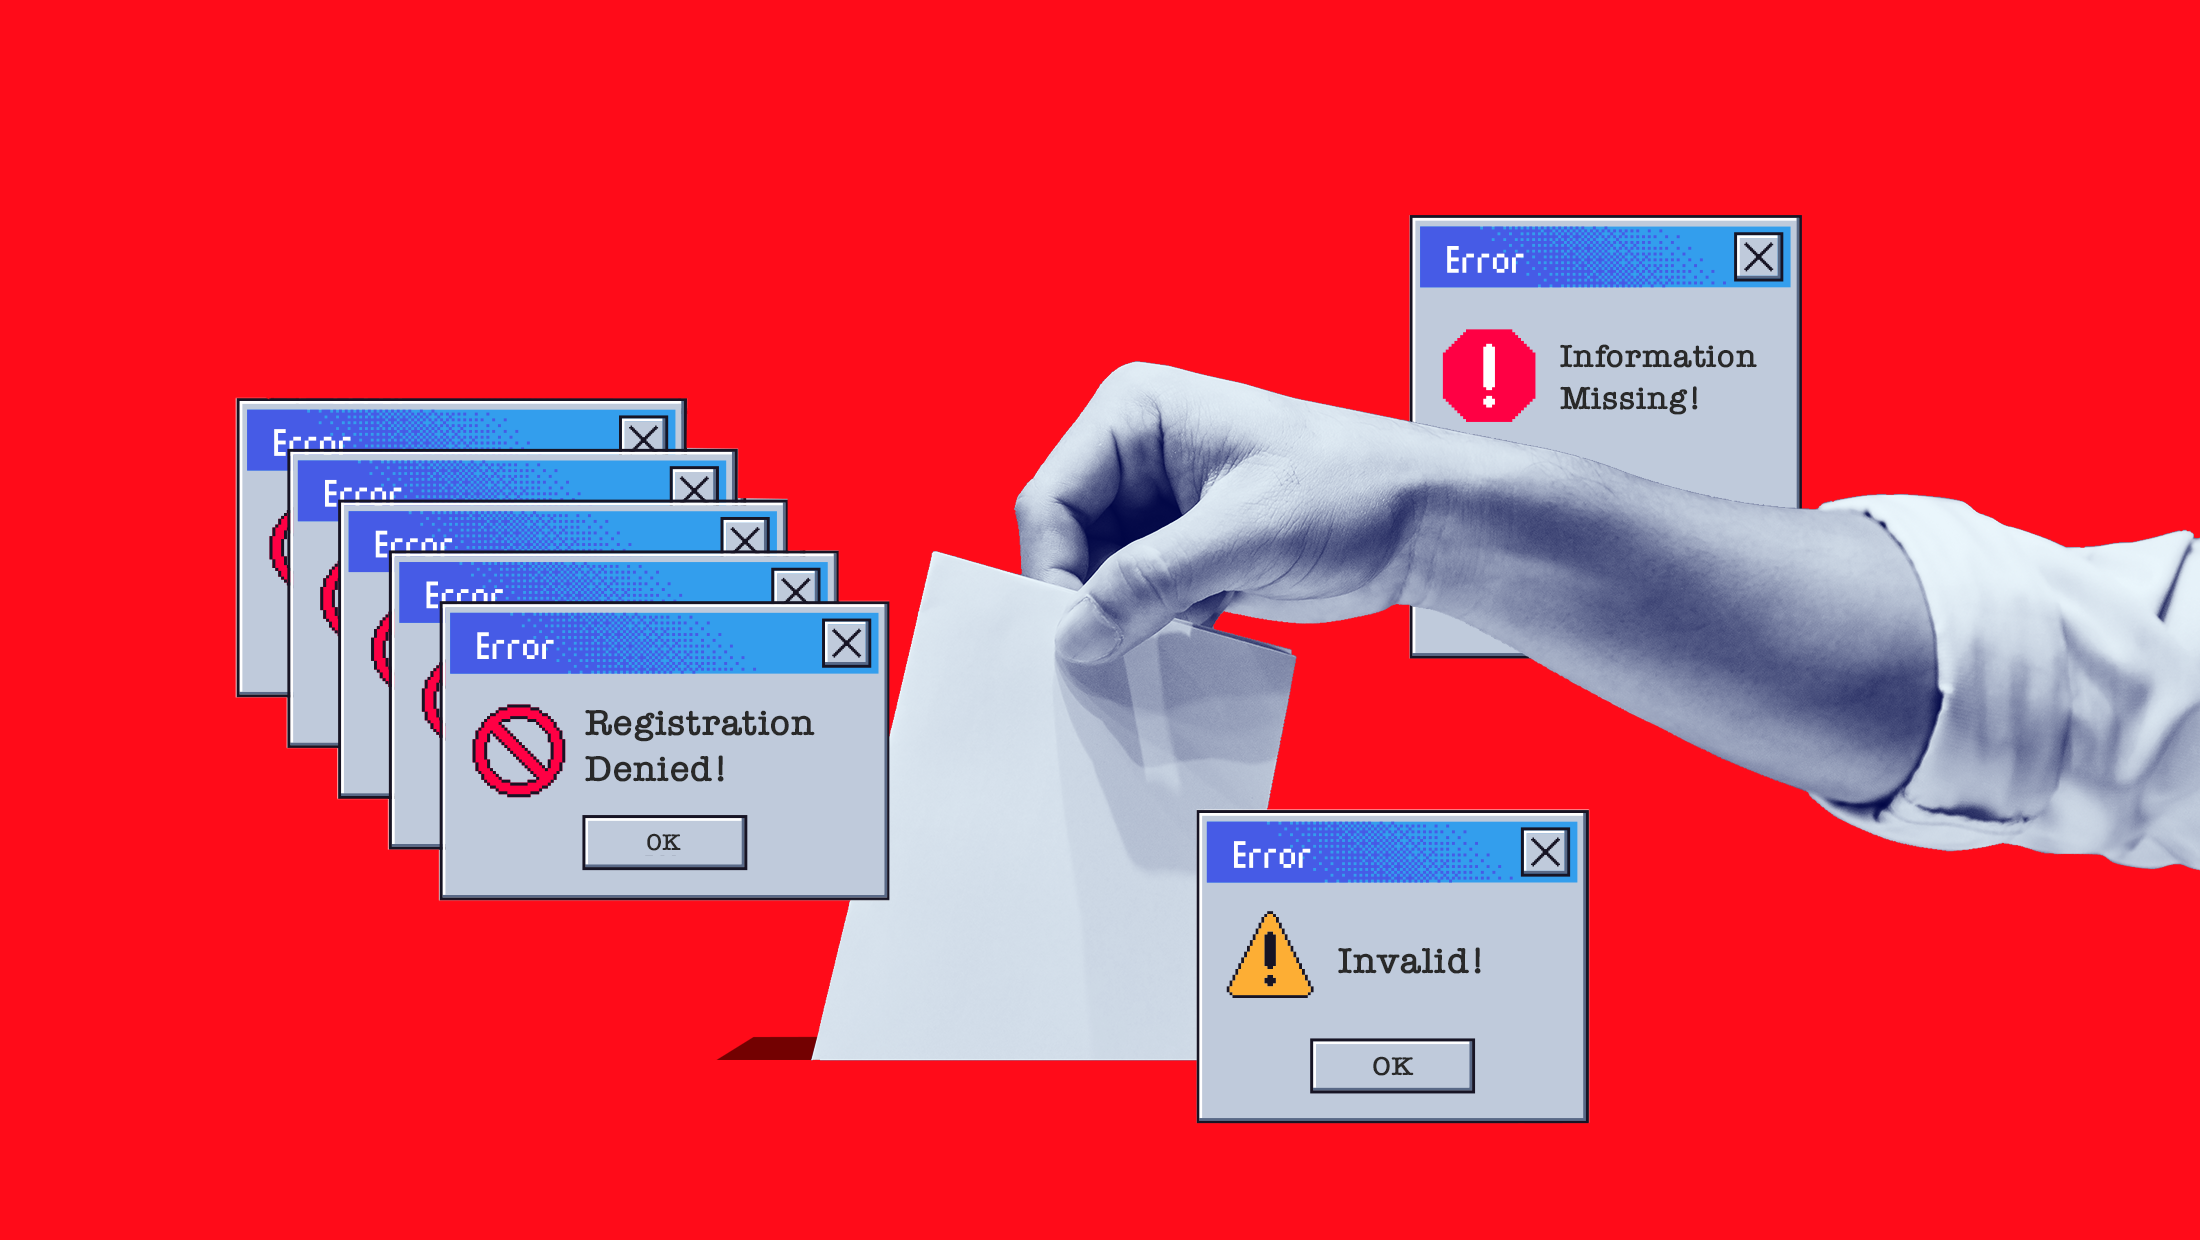 A hand casting a ballot accompanied by various error messages that include warnings like "REGISTRATION DENIED", "INFORMATION MISSING!" and "INVALID!"